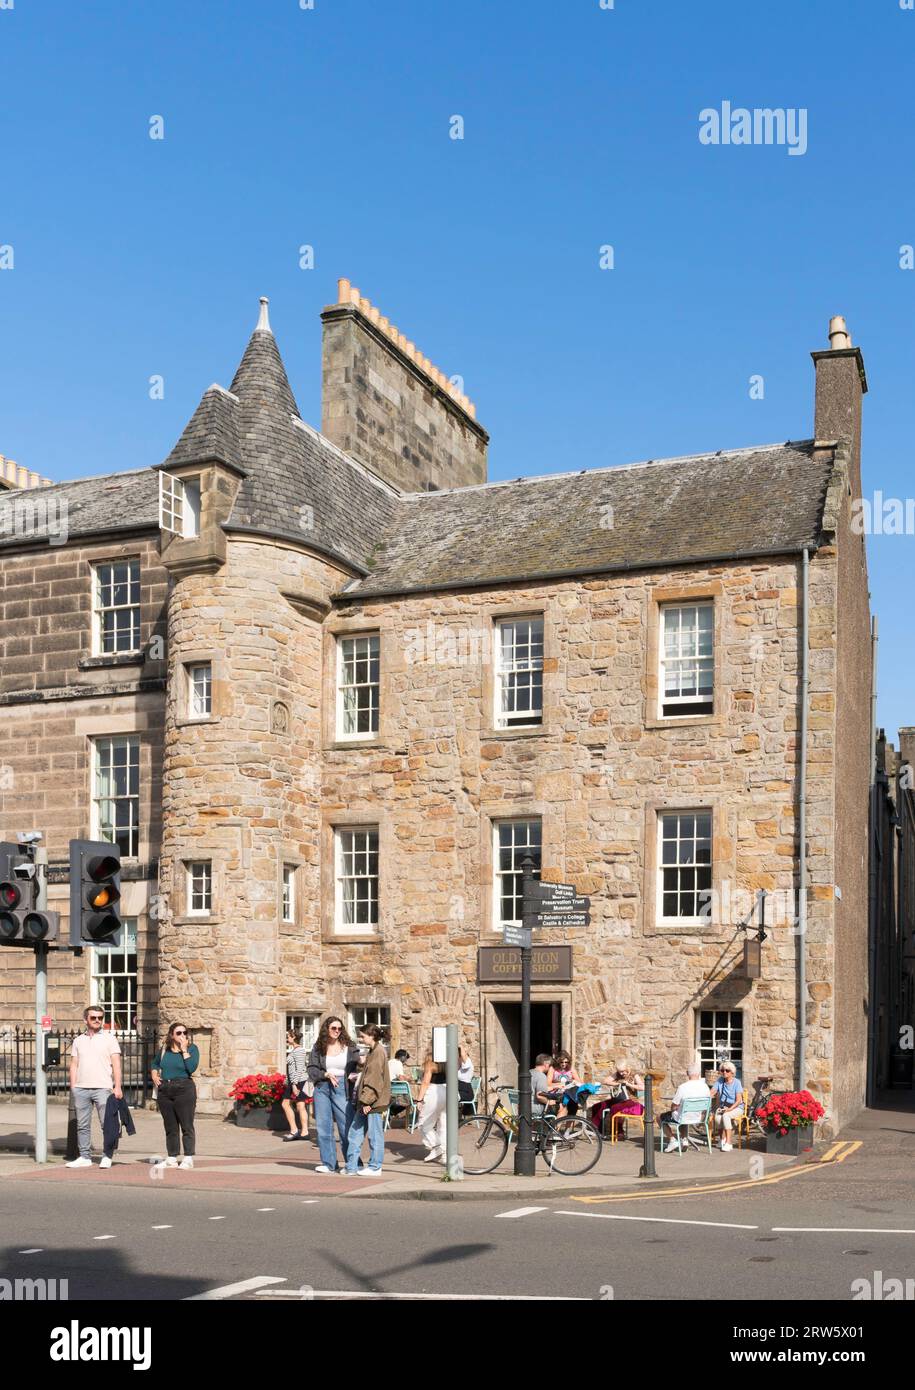 People sitting outside the Old Union Coffee shop in St Andrews, Fife, Scotland, UK Stock Photo